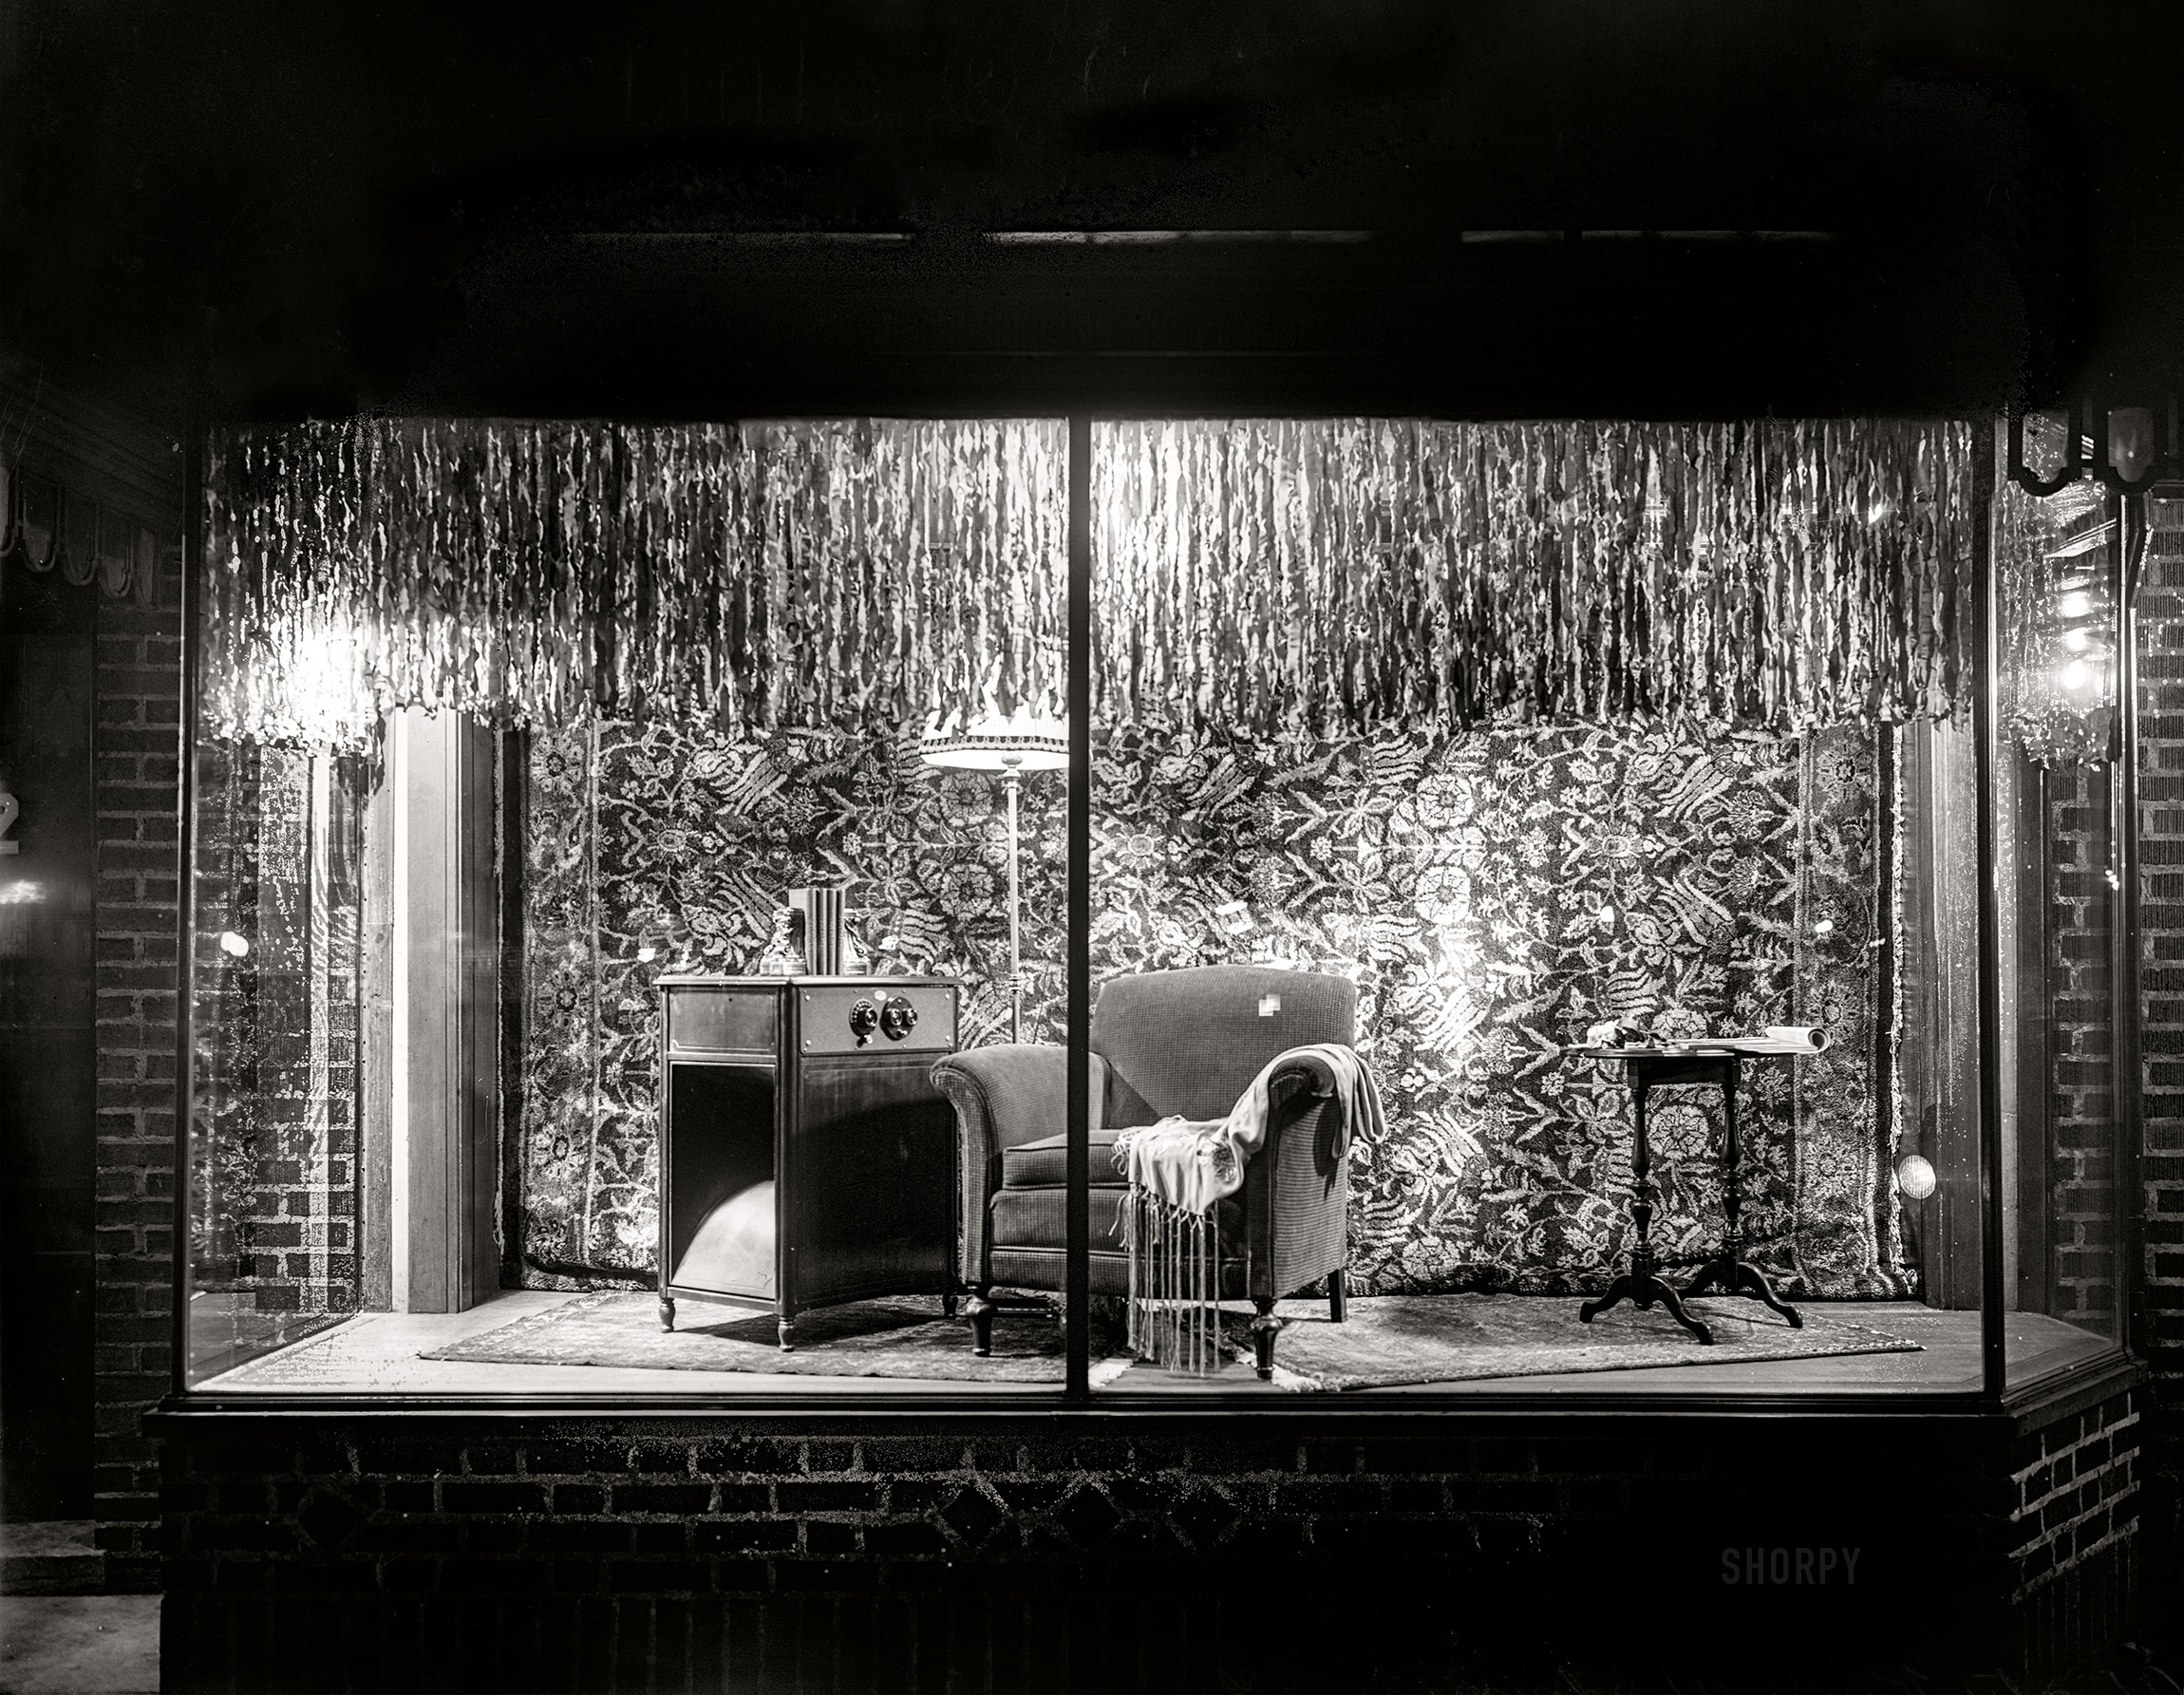 Washington, D.C., circa 1926. "Thos. R. Shipp Co. -- Atwater Kent window display at Little & Company, 13th & I Streets N.W." More specifically, the Atwater Kent Model 30 radio. National Photo Company glass negative. View full size.